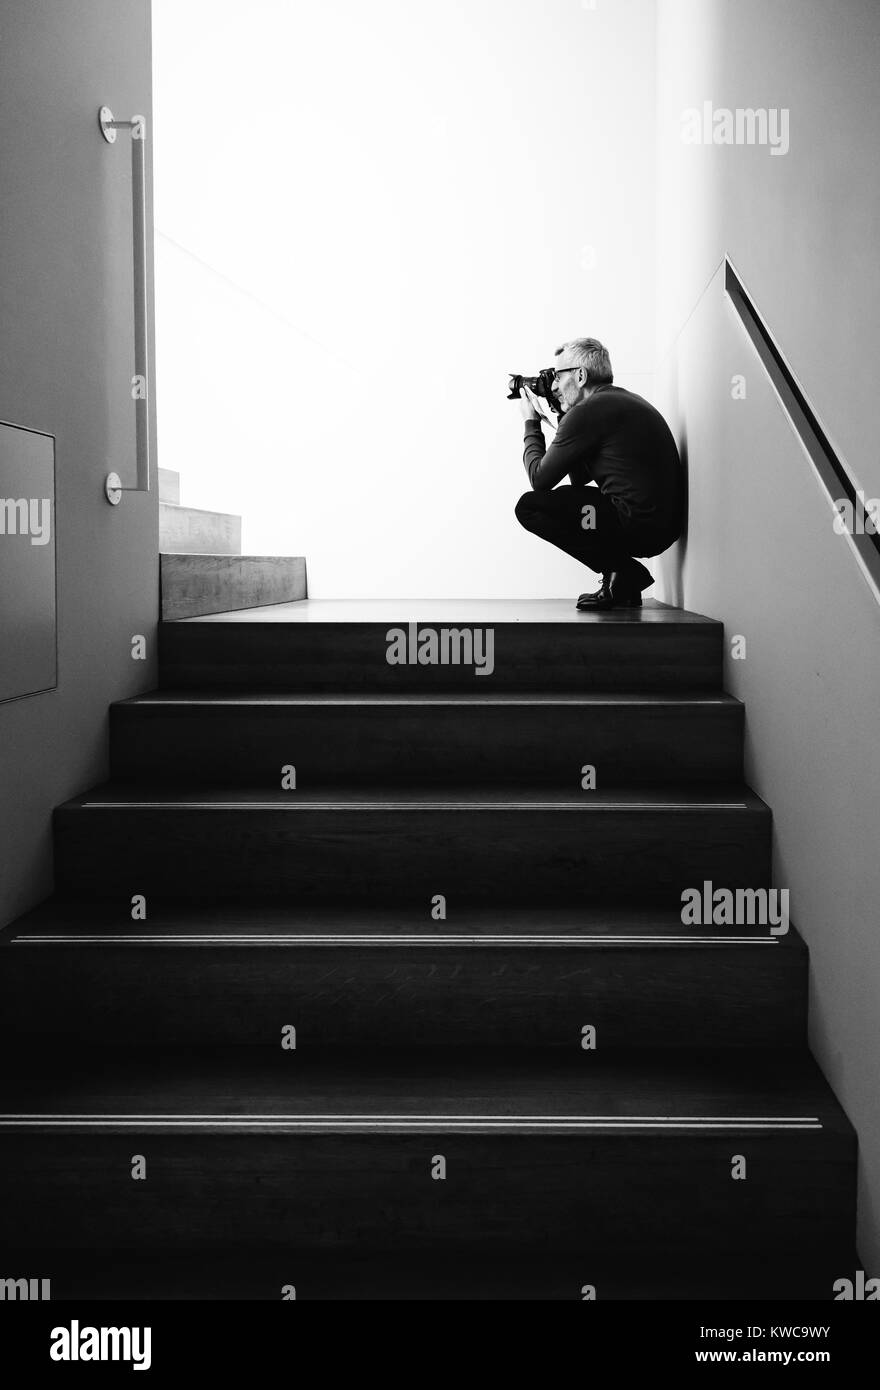 Amsterdam, Netherlands - August 3, 2016: Visitor in the interior of Rijksmuseum  taking photos in staircase Stock Photo